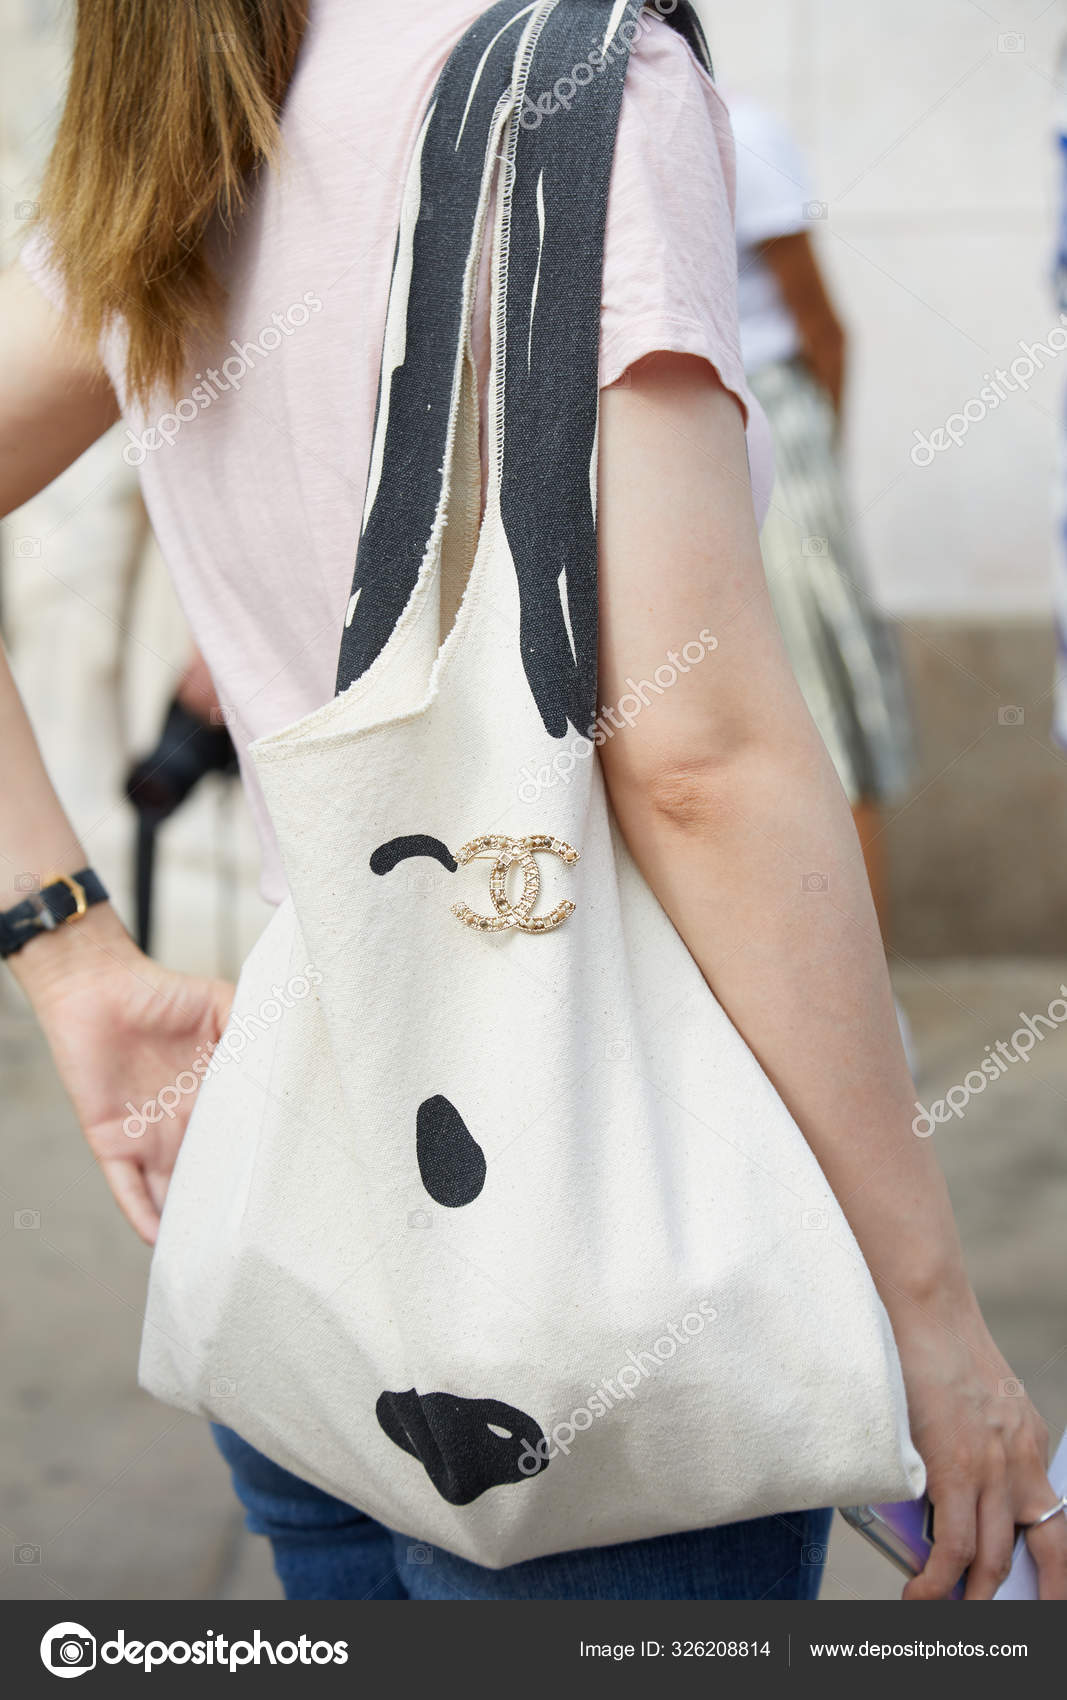 Woman with black and white tote bag with Chanel brooch before